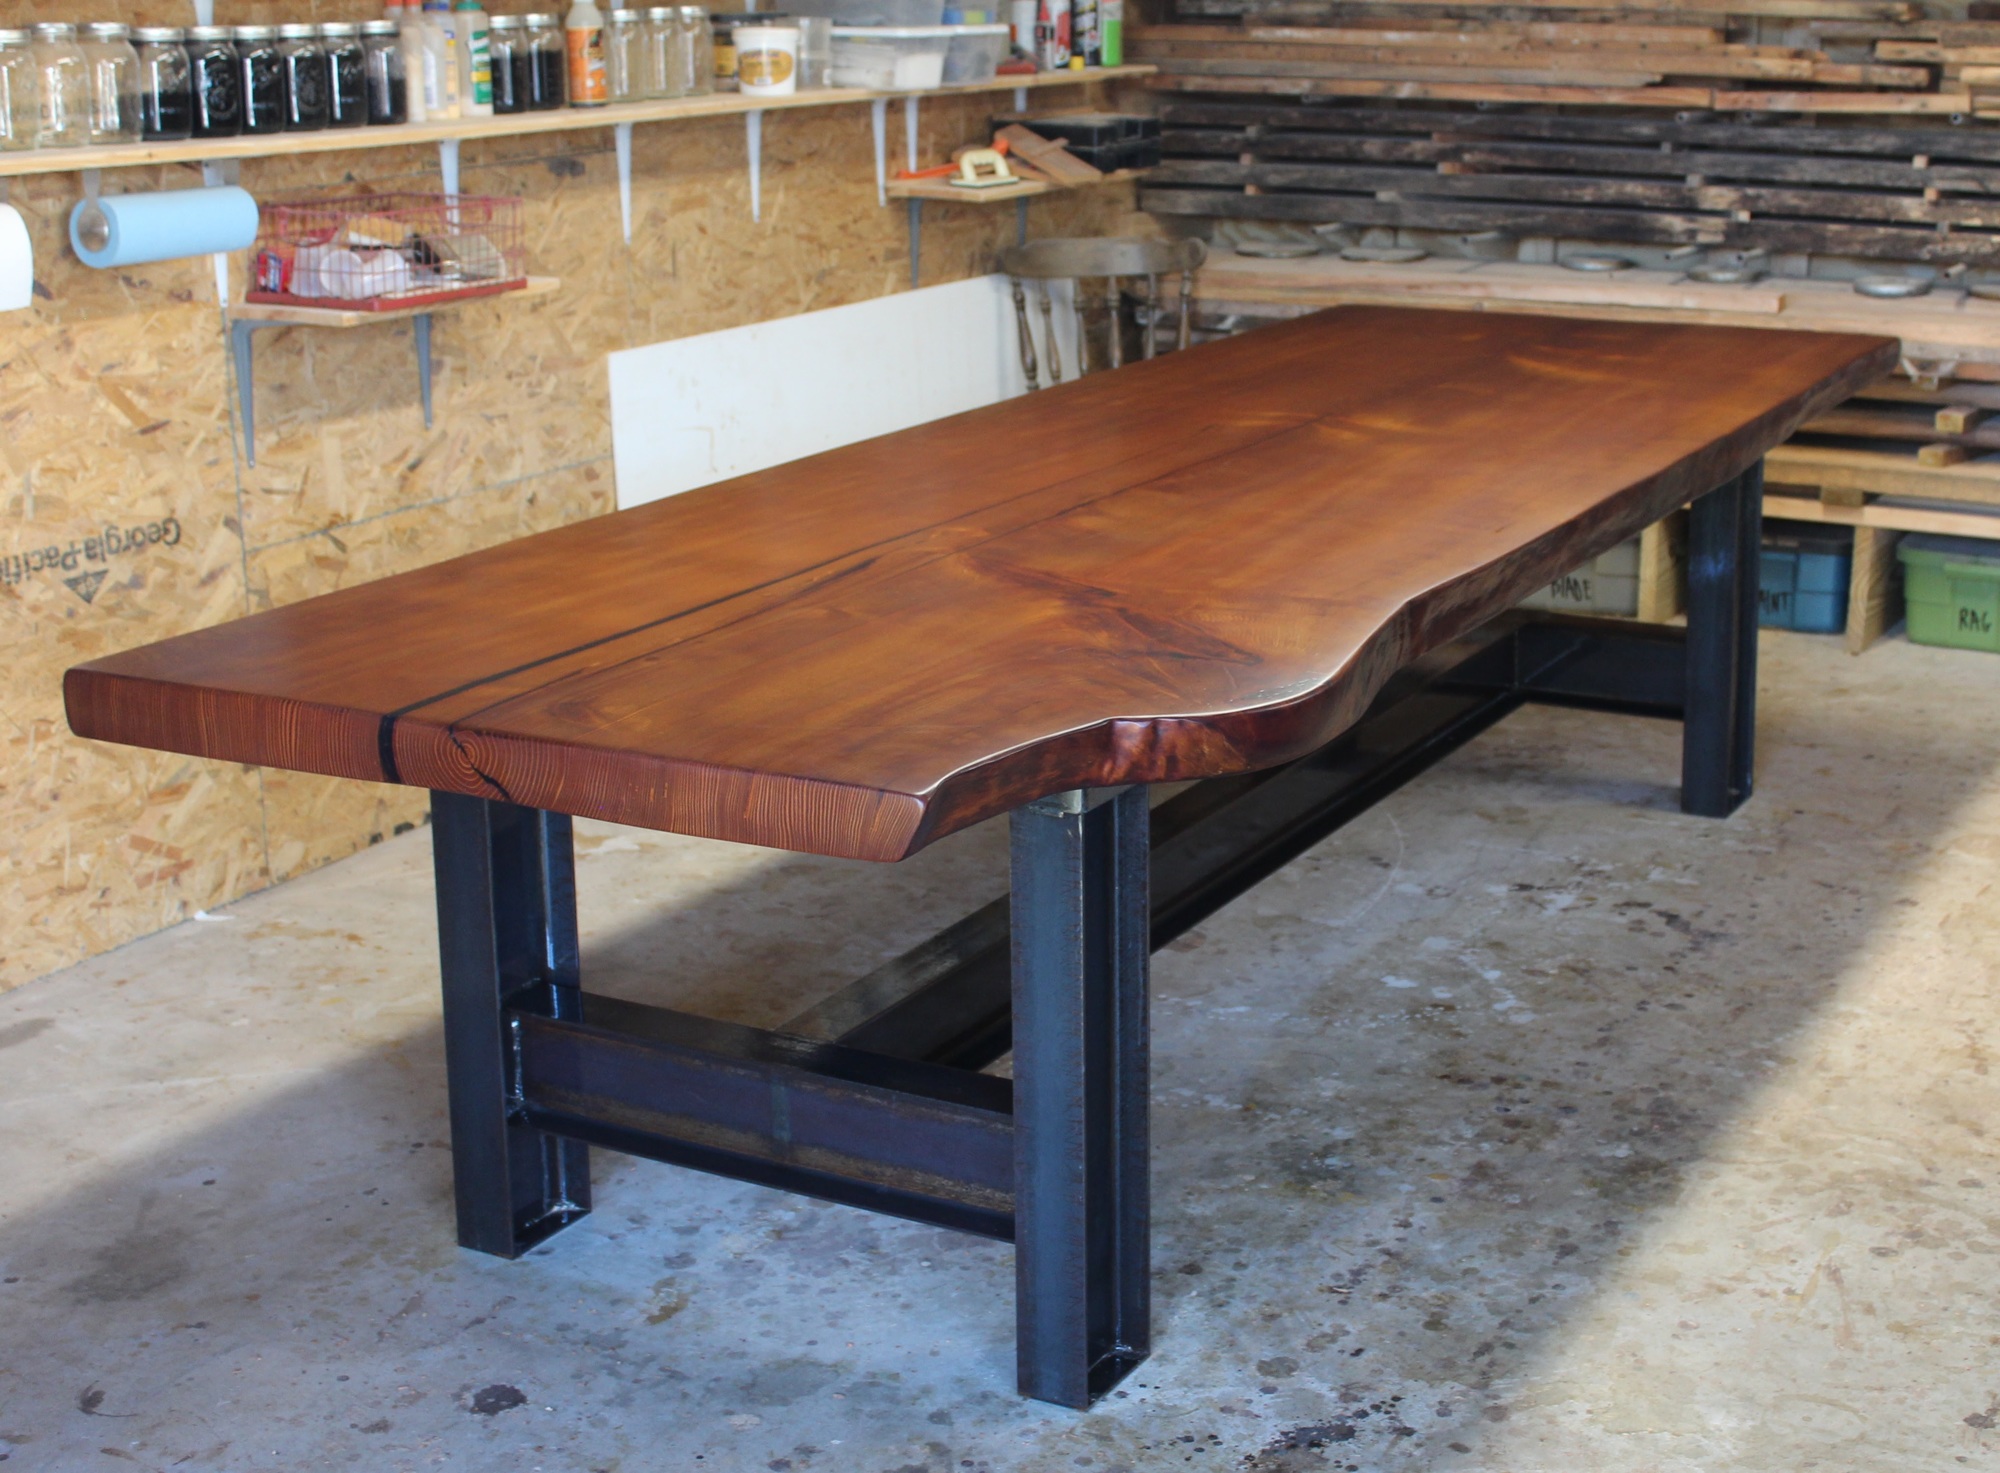 Tremblay enjoys working large-scale, like this 12-foot harvest table.